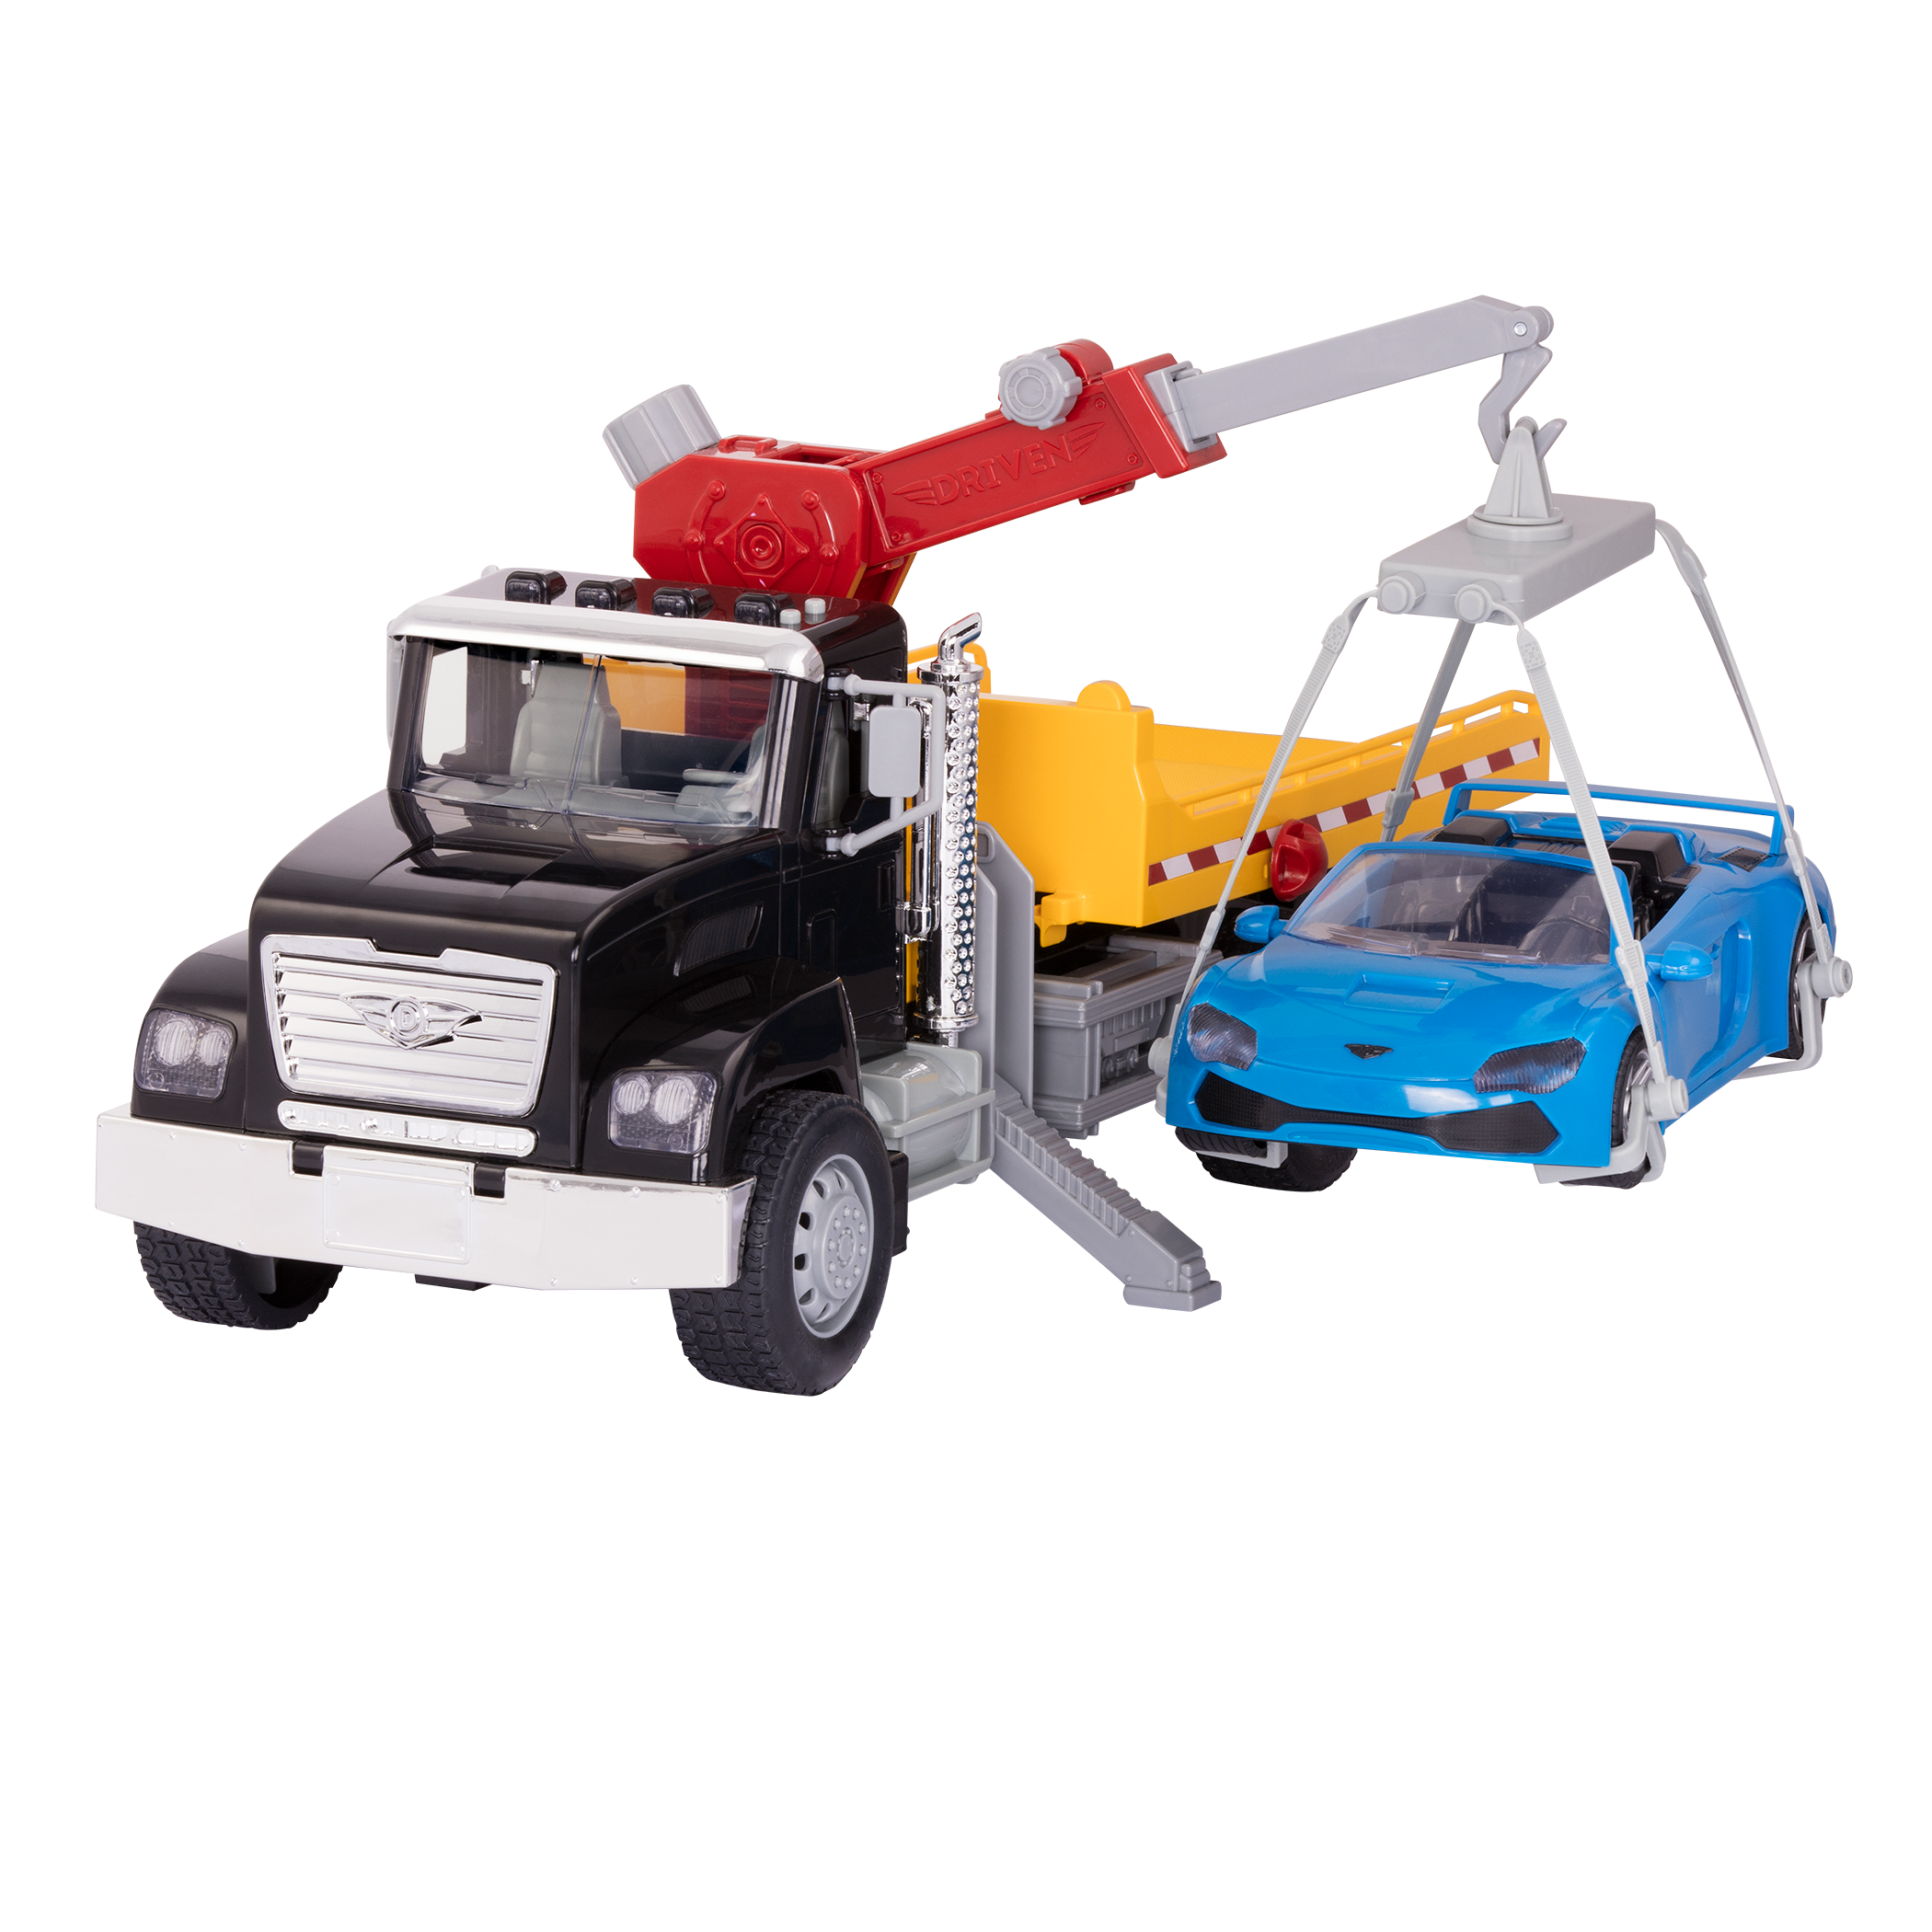 Crane Construction Vehicles for kids with Blippi toy Flatbed Truck